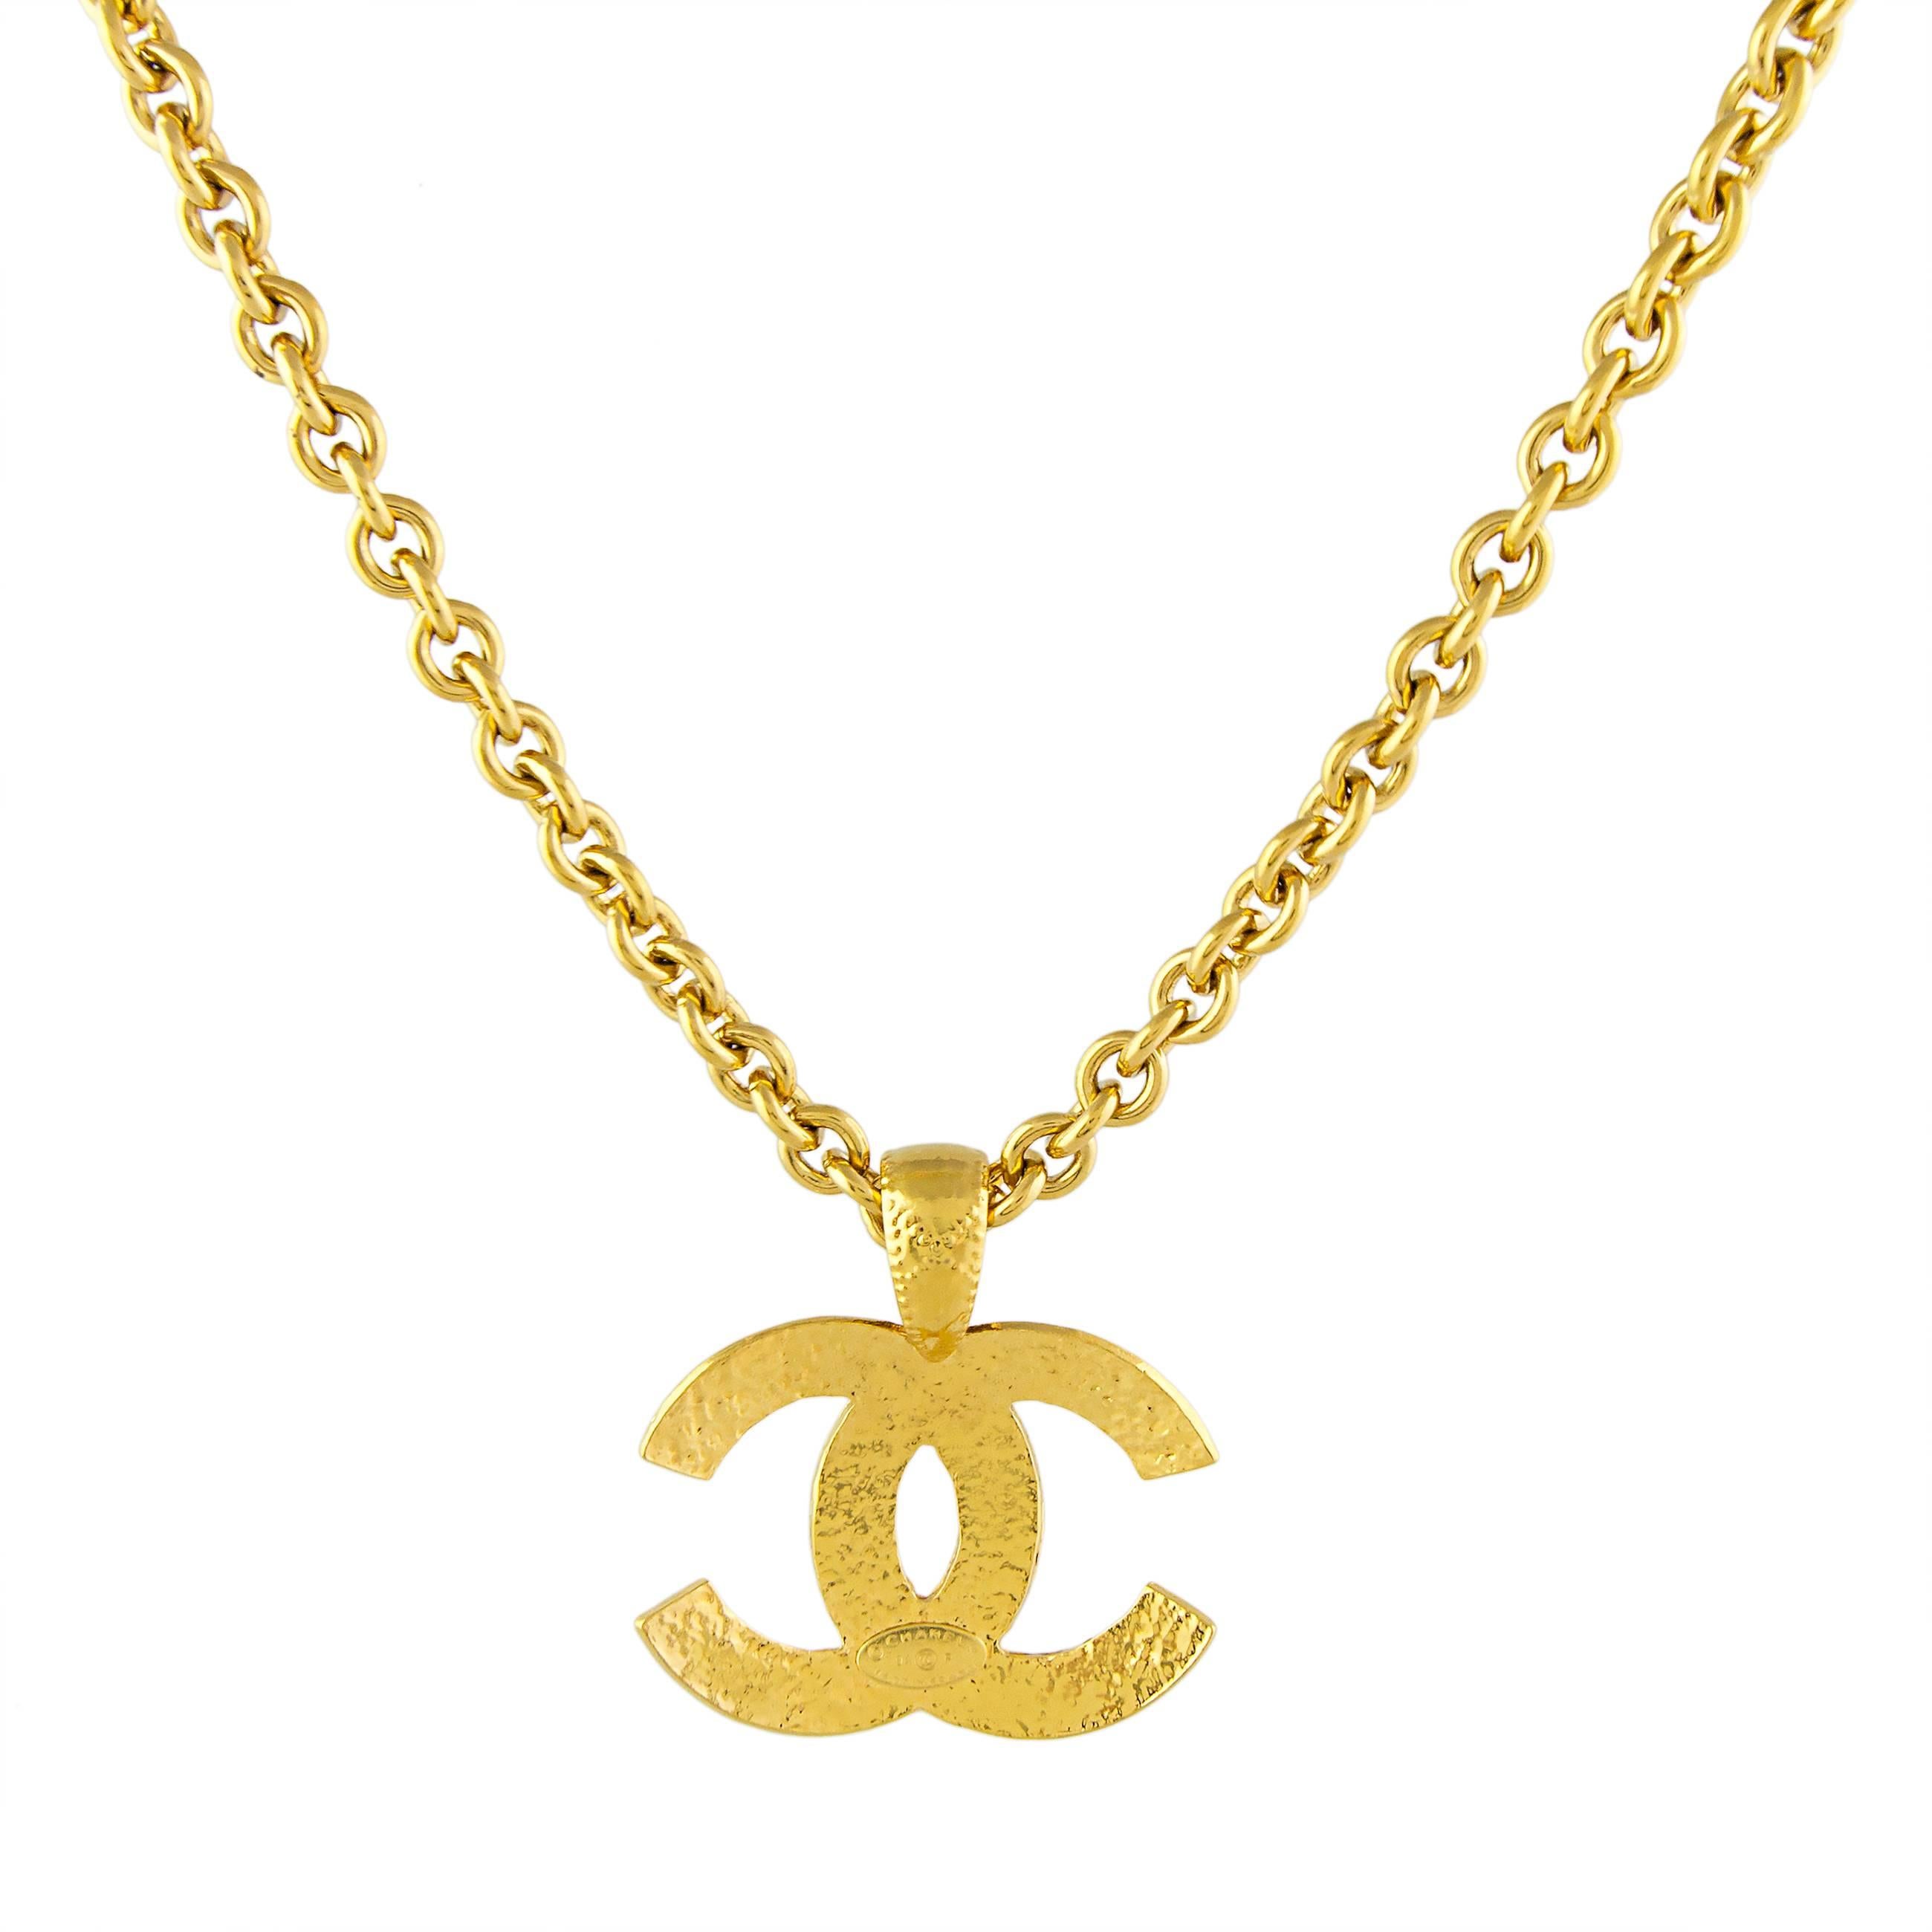 Chanel CC Logo Long Chain Necklace. 
A highly sought after piece for lovers of classic Chanel.
High carat gold plated and fully marked.
Made in France for the 1994 spring collection.
Please note this is a large piece, 45cm long and the pendant is